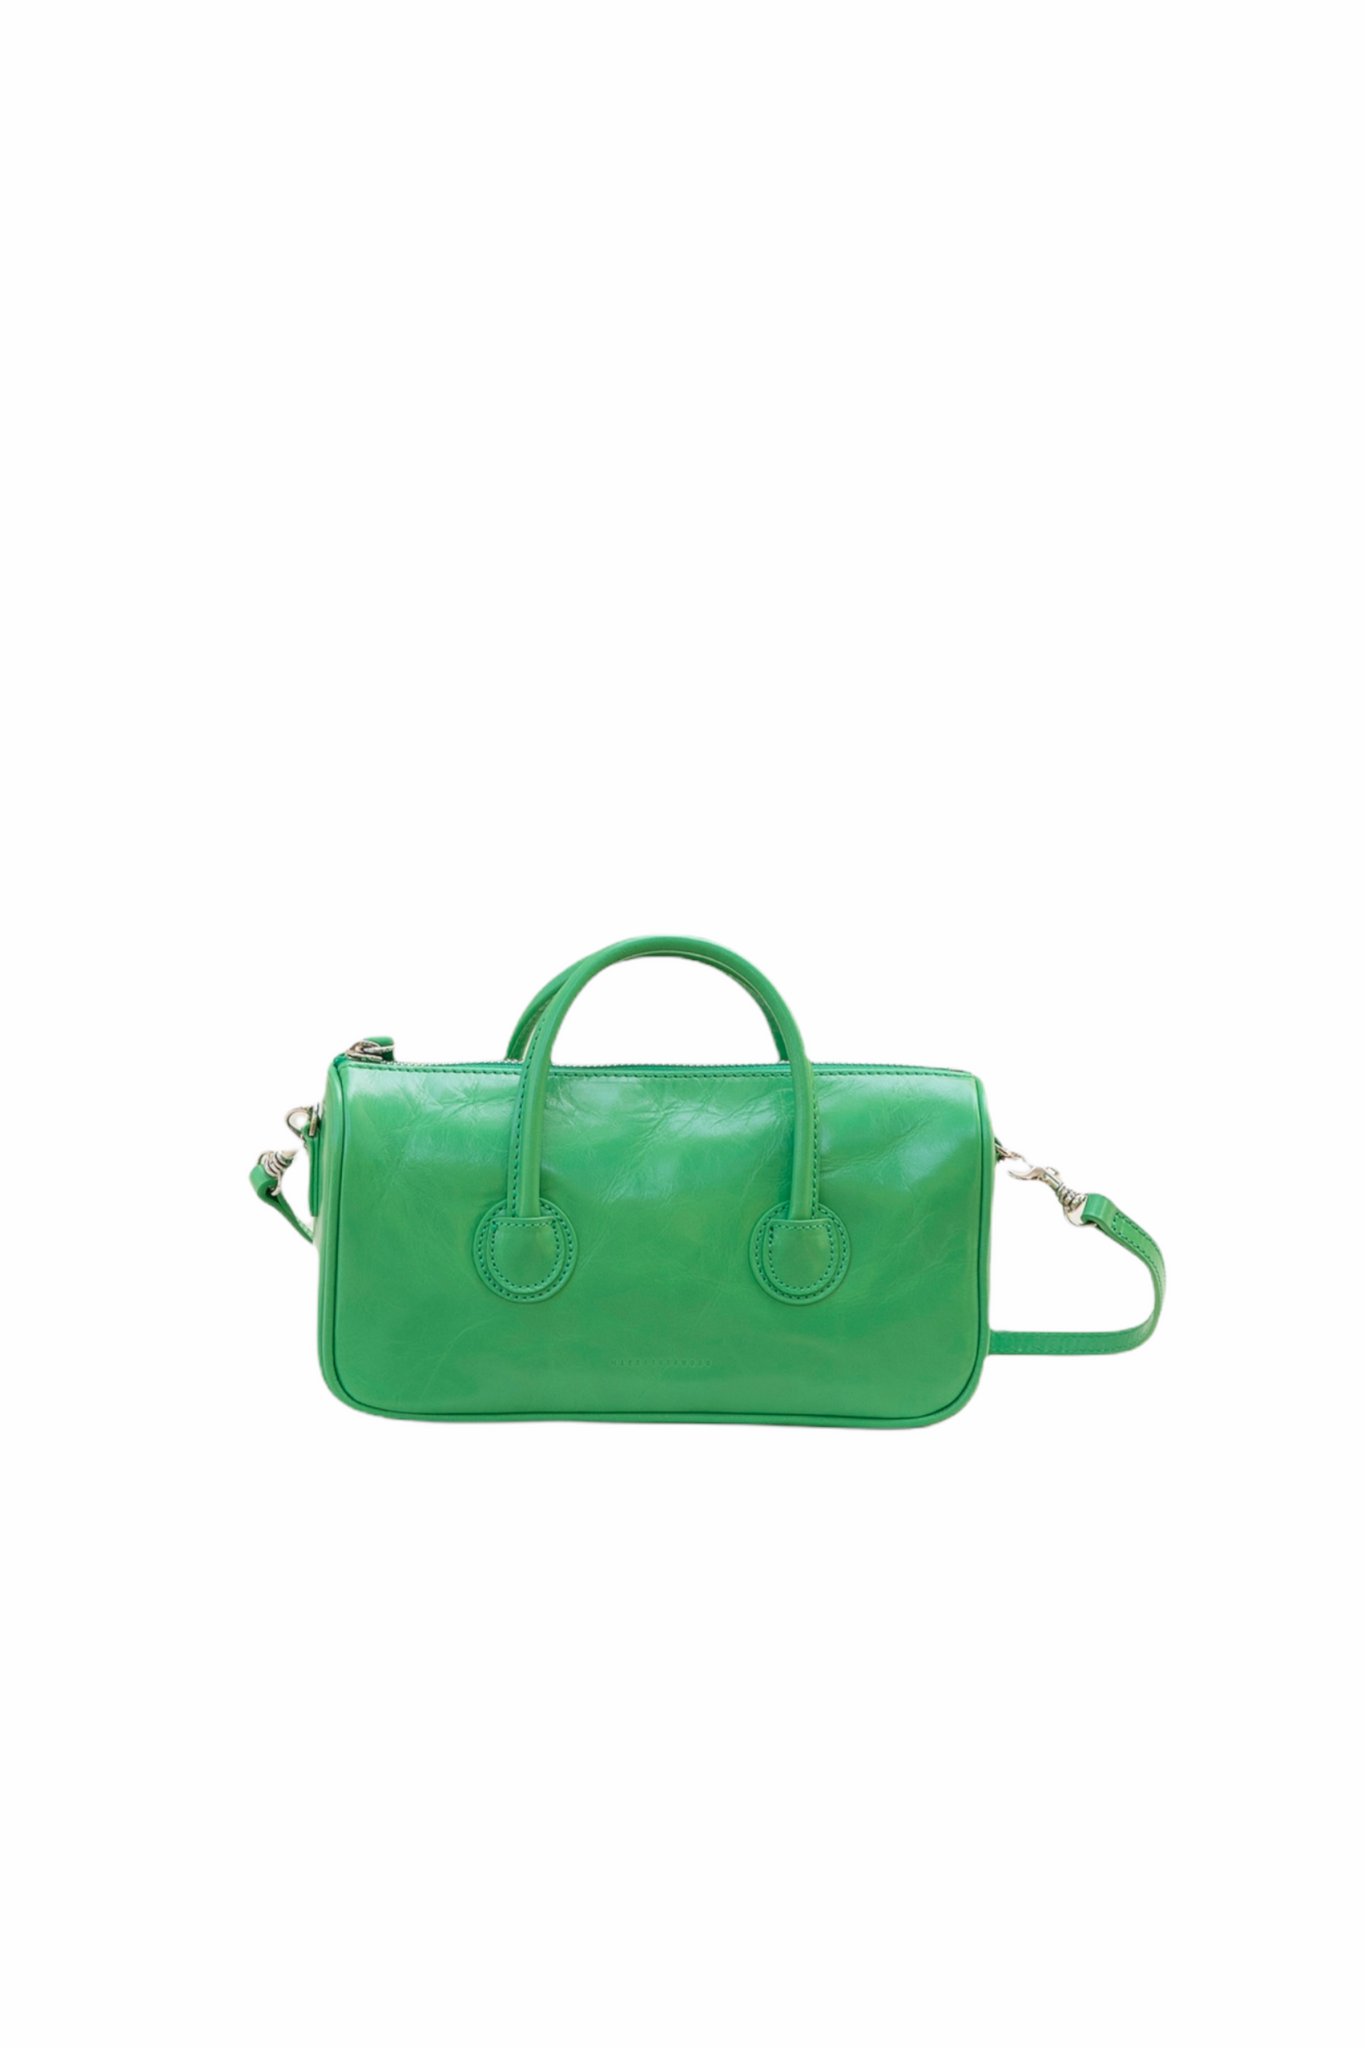 SMALL ZIPPER BAG IN MINT GREEN BY MARGESHERWOOD